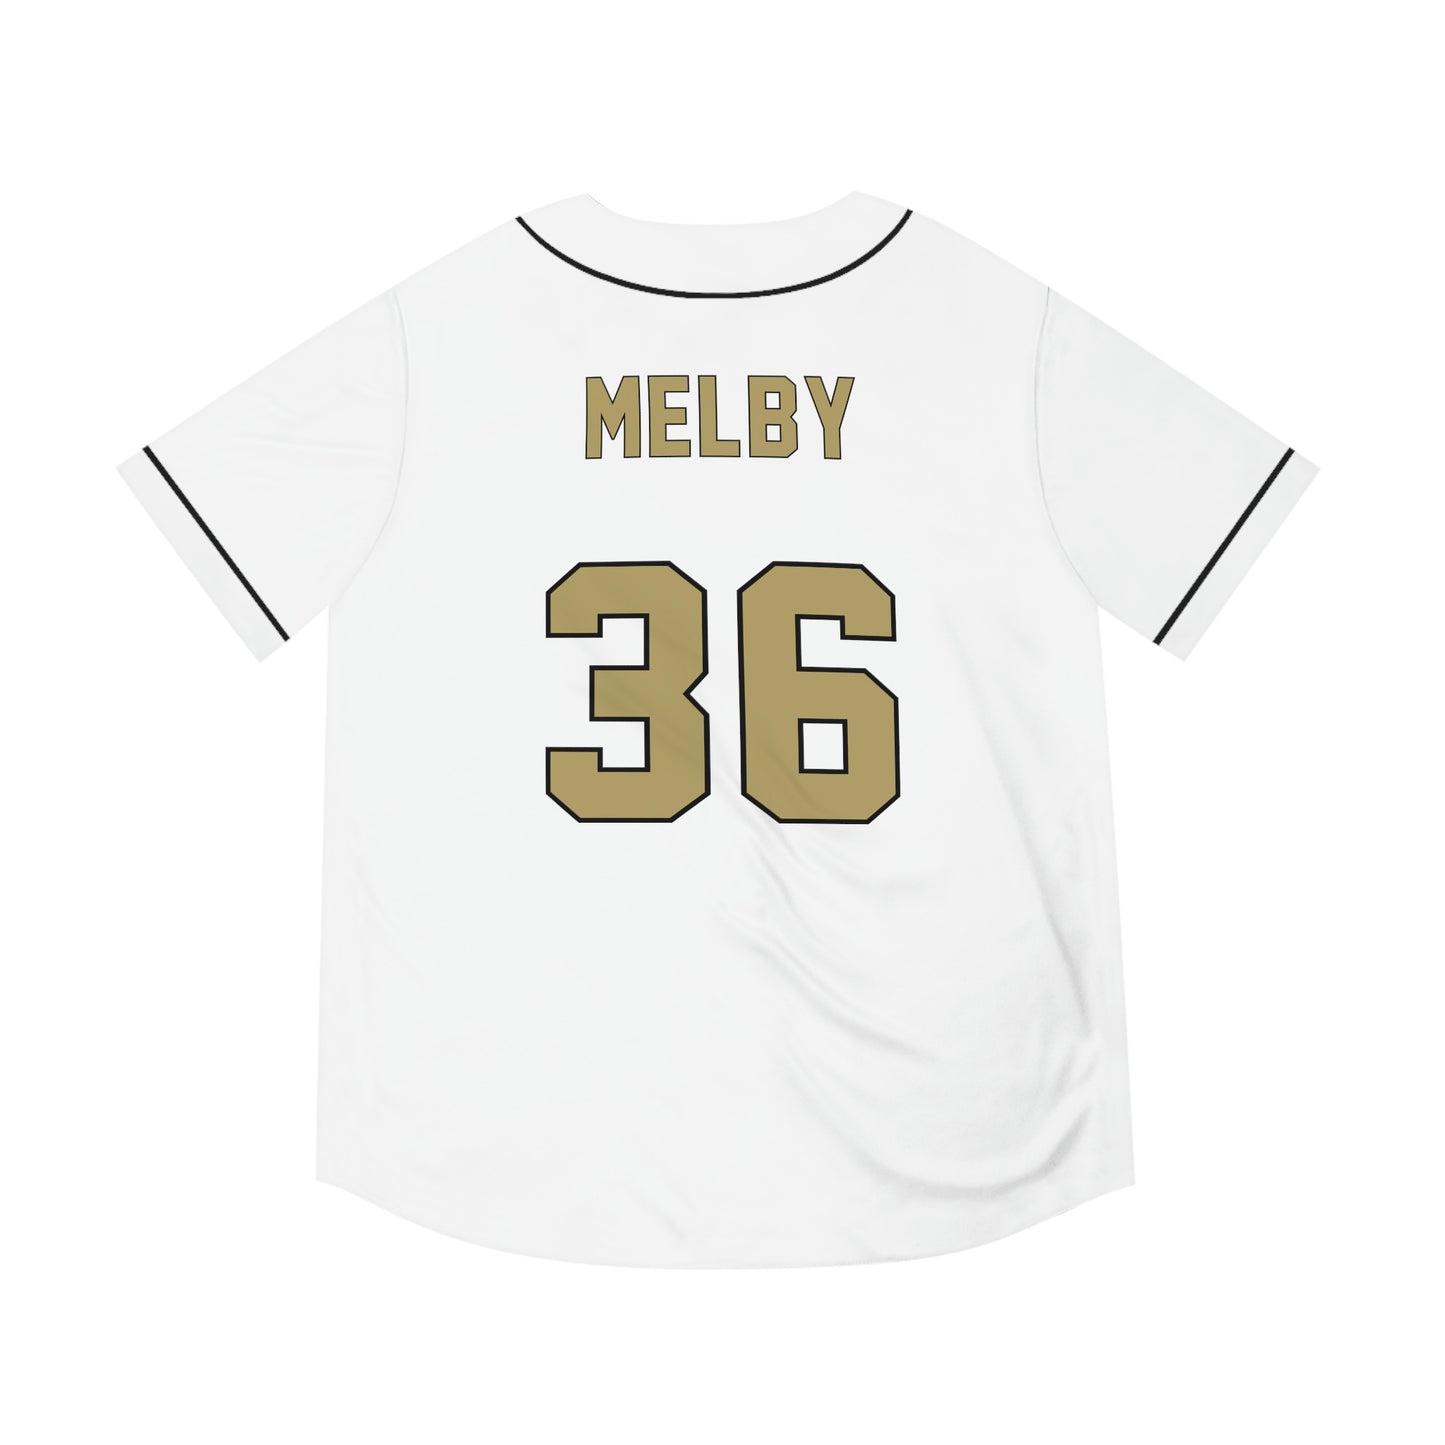 Will Melby Baseball Jersey (White)